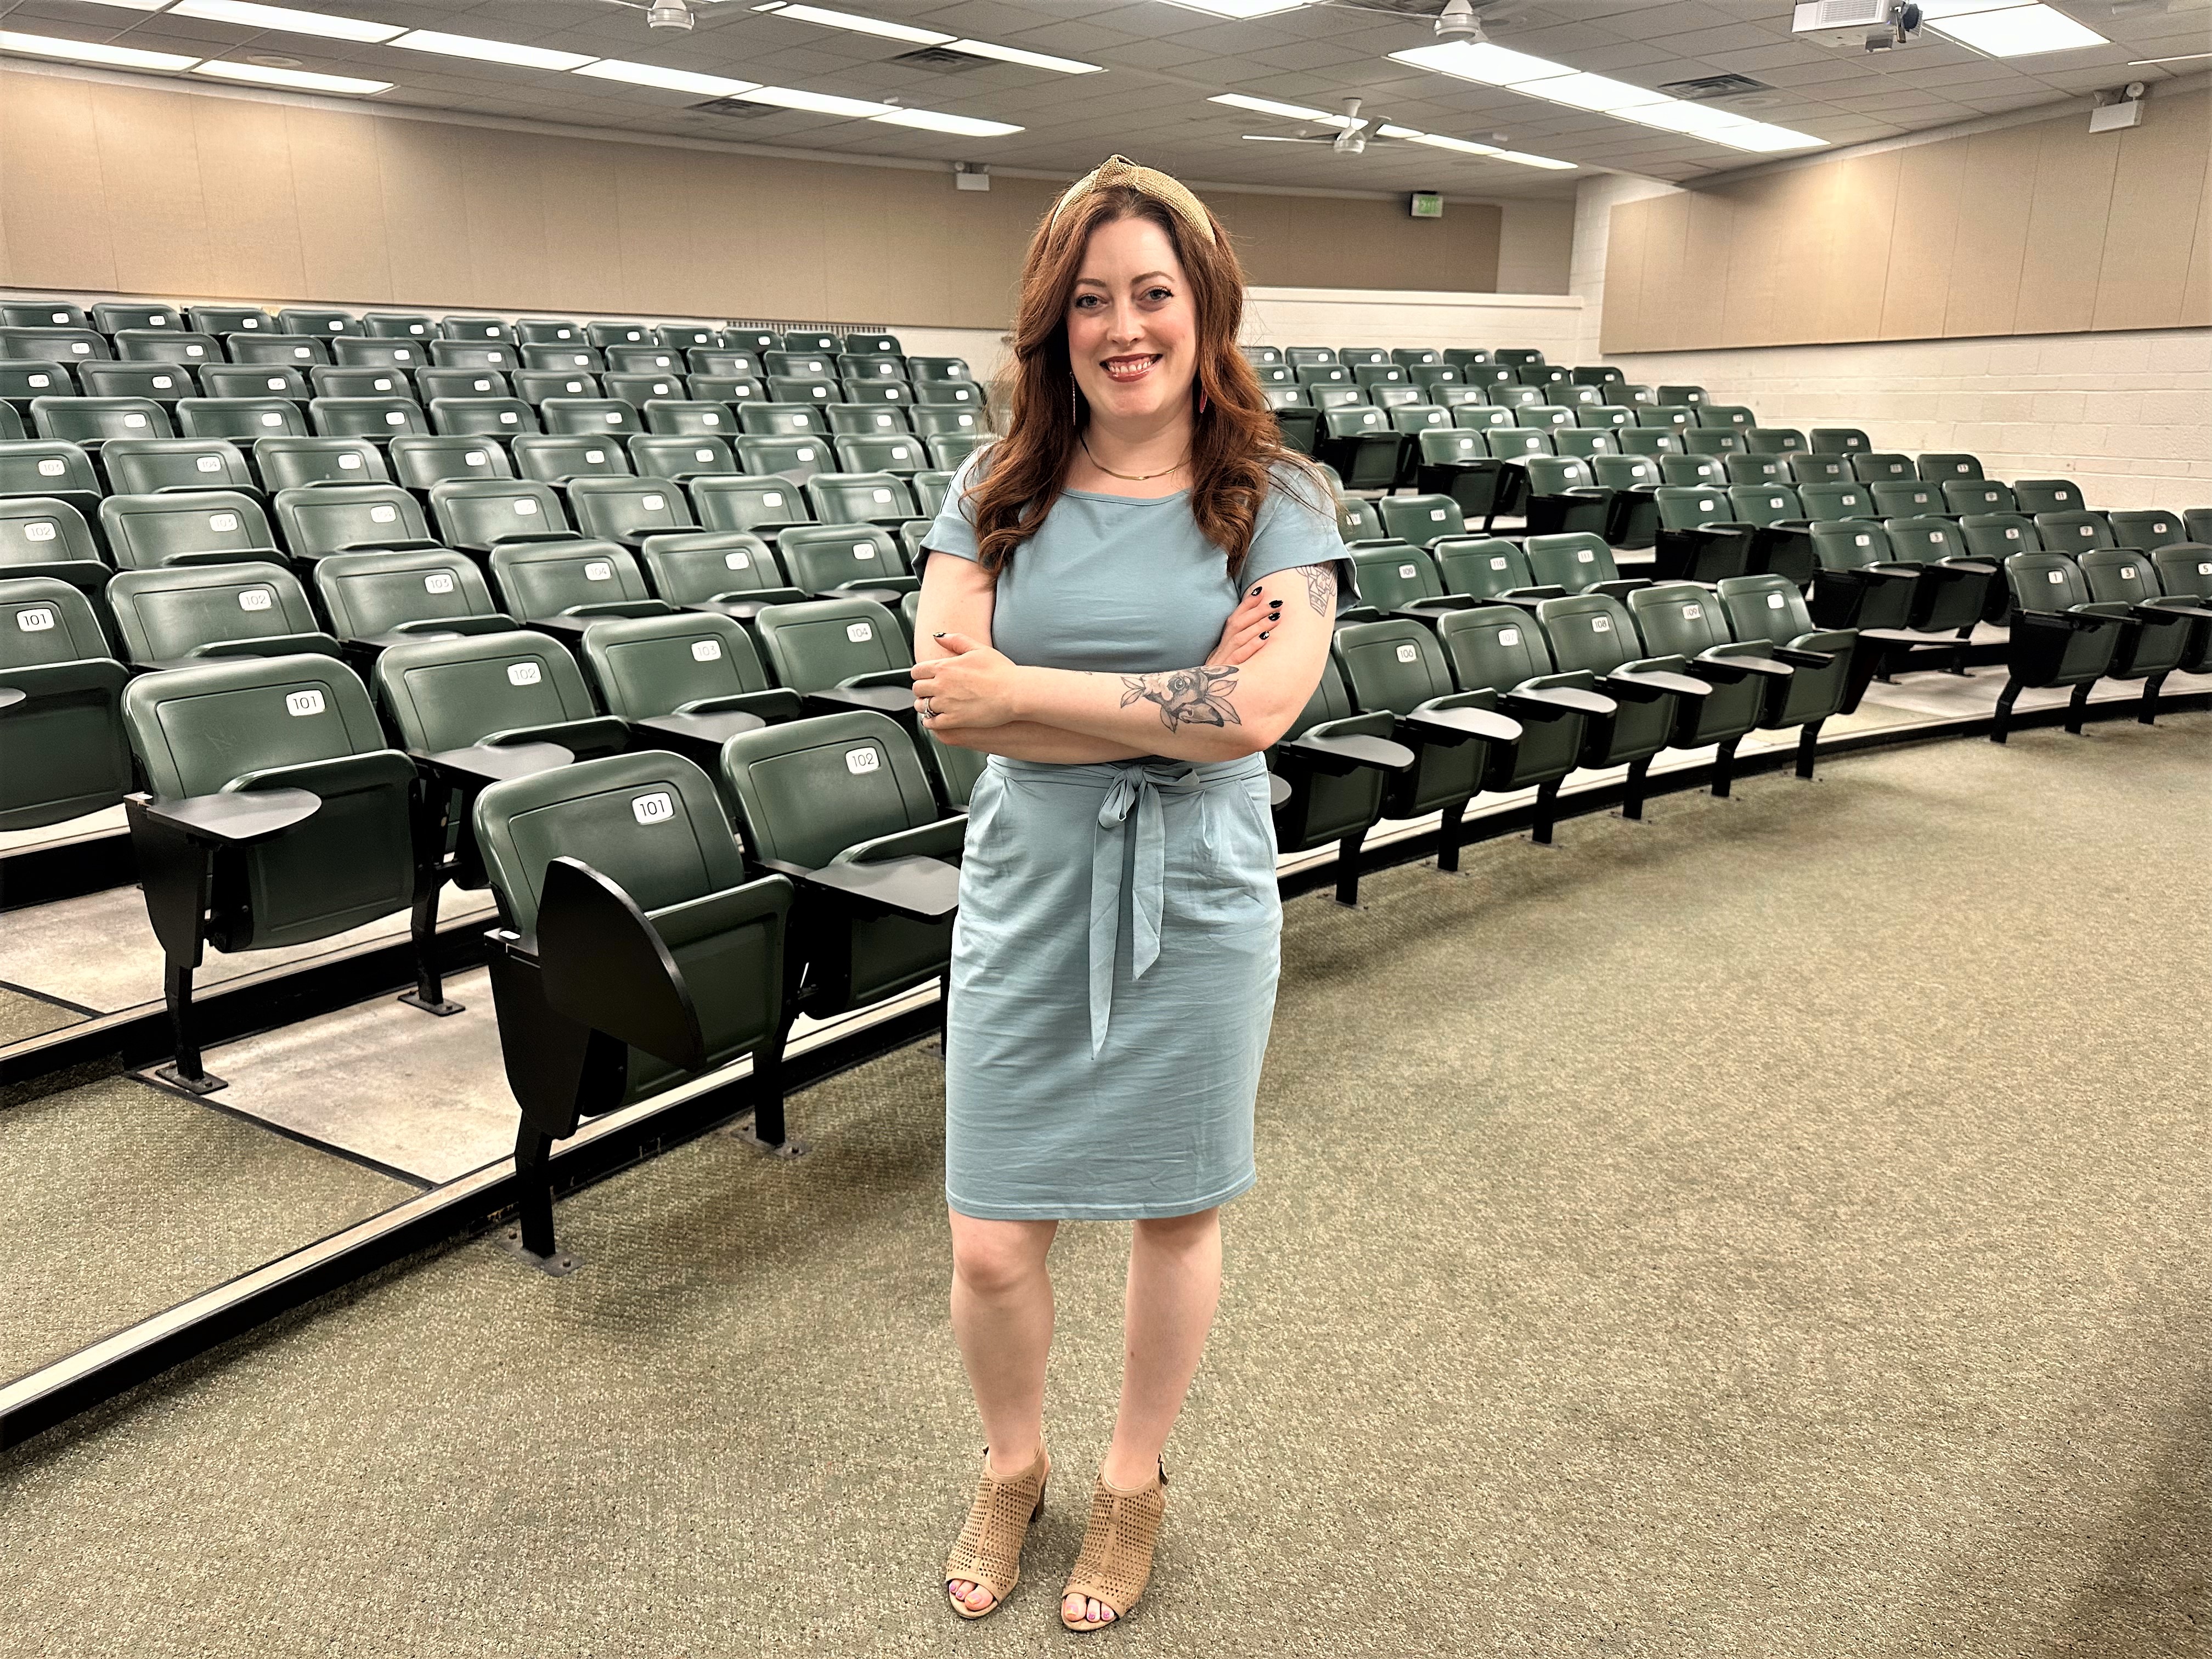 Community Psychology is Key to Dr. Katie Clements’ Teaching 